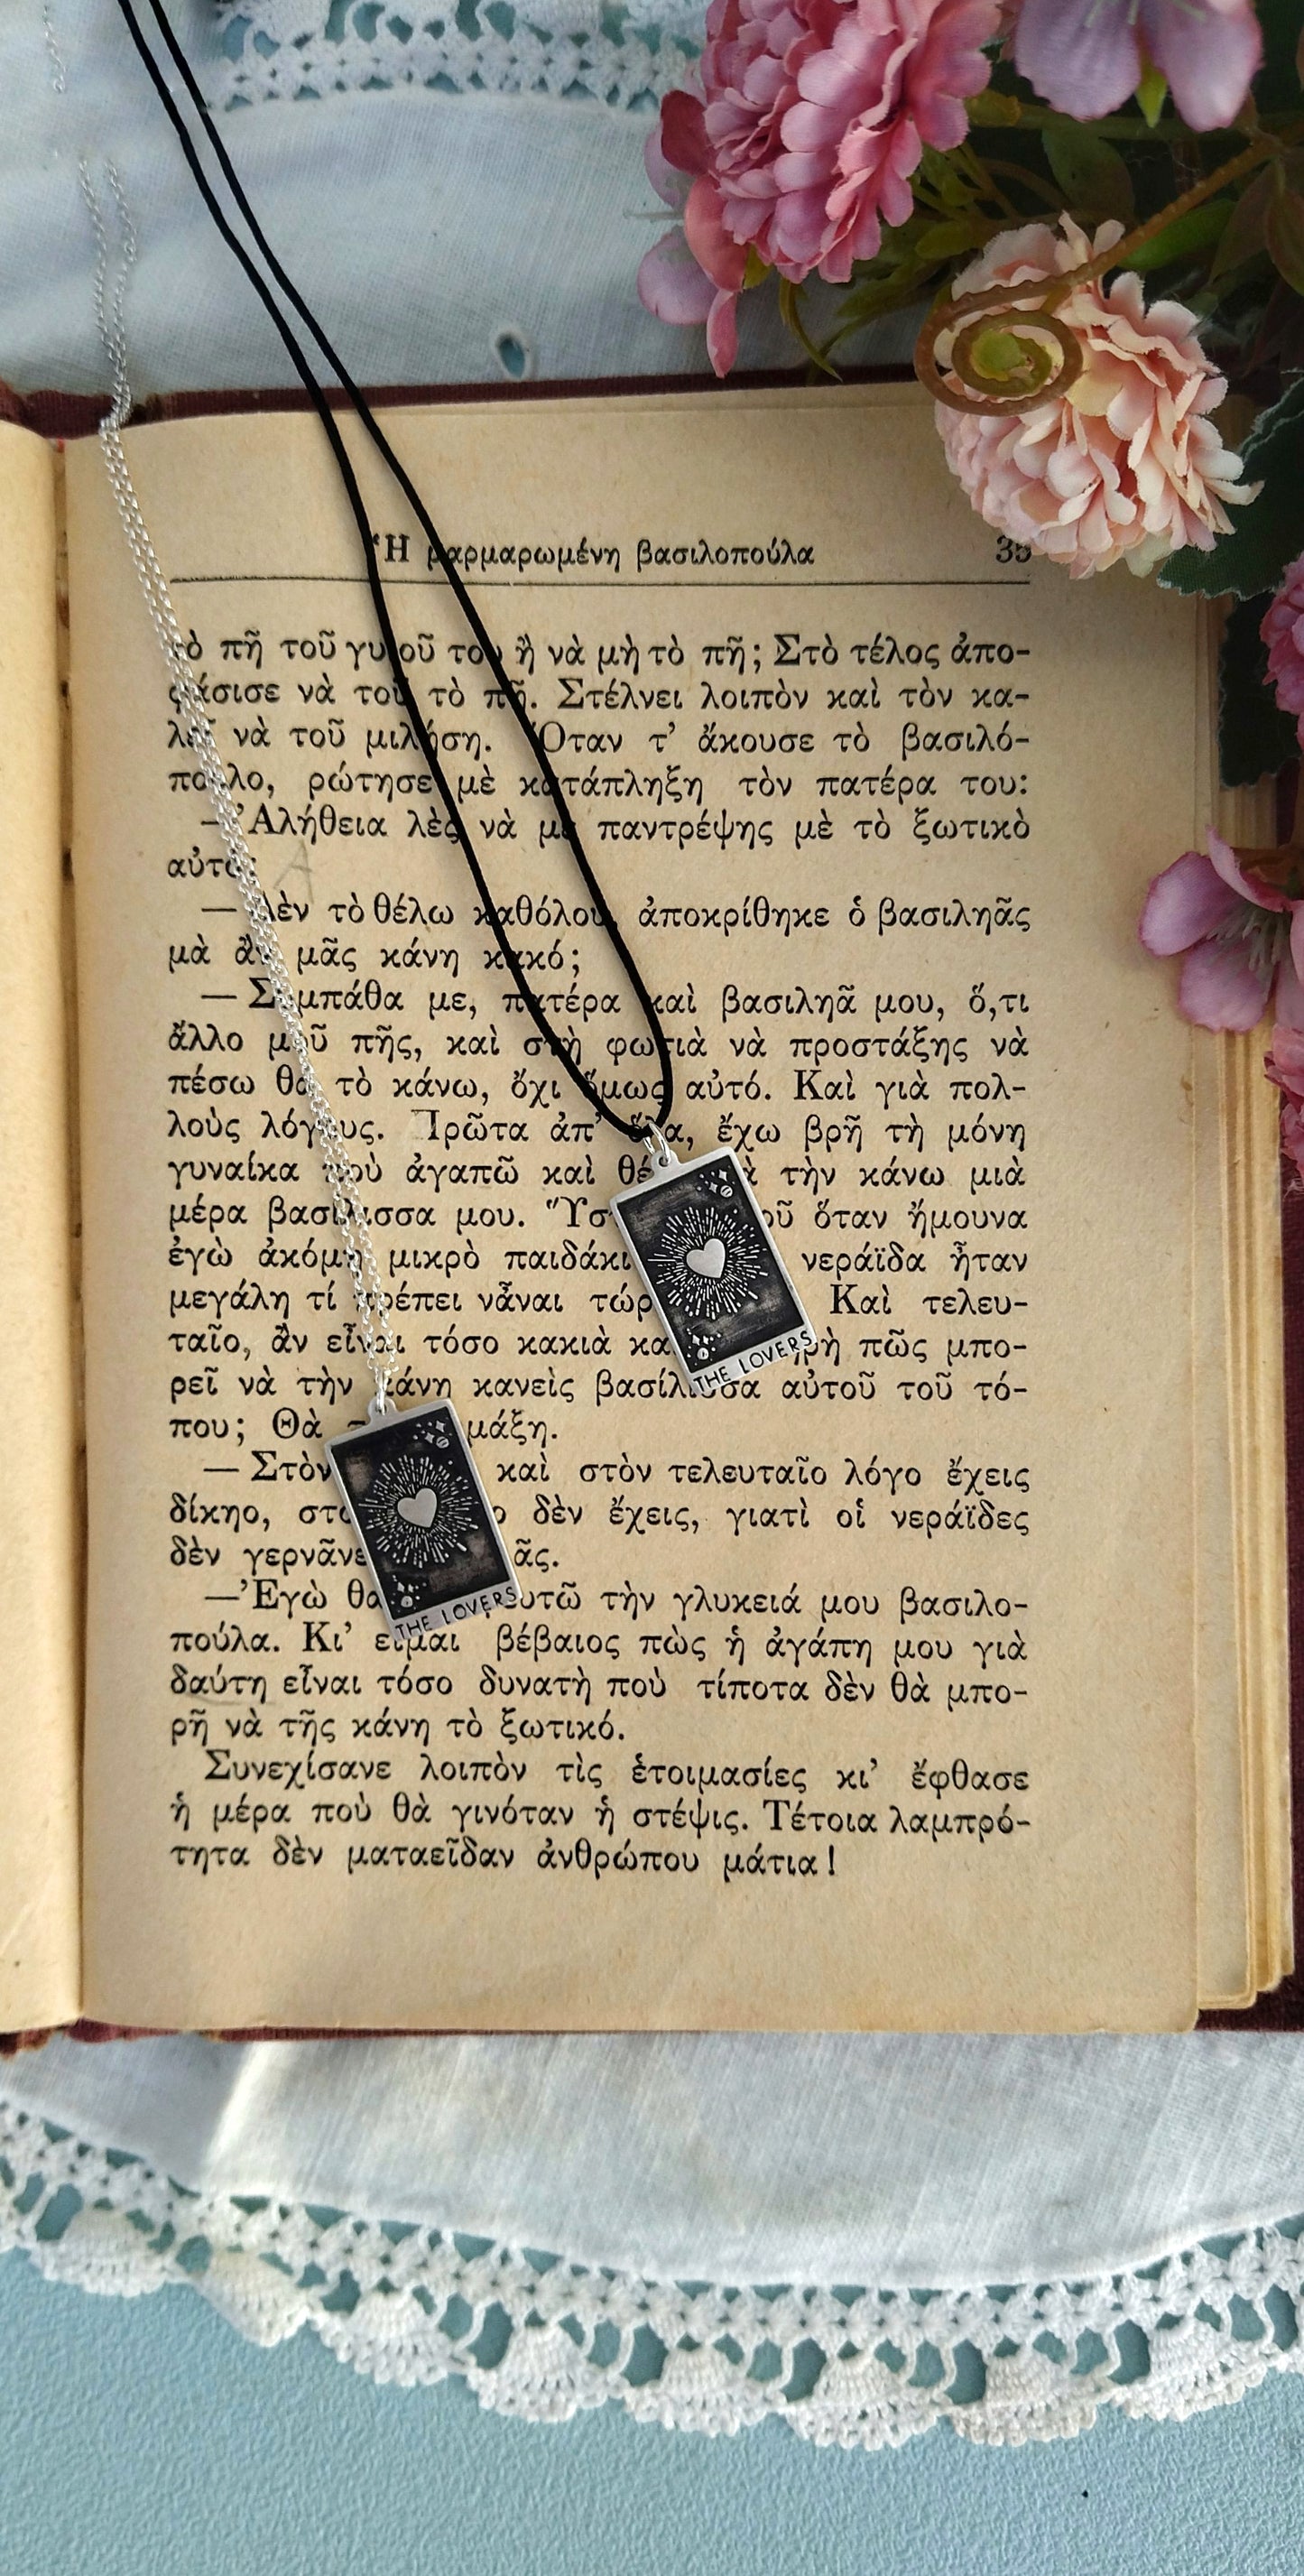 "The Lovers" Tarot Card Couples Set Necklace